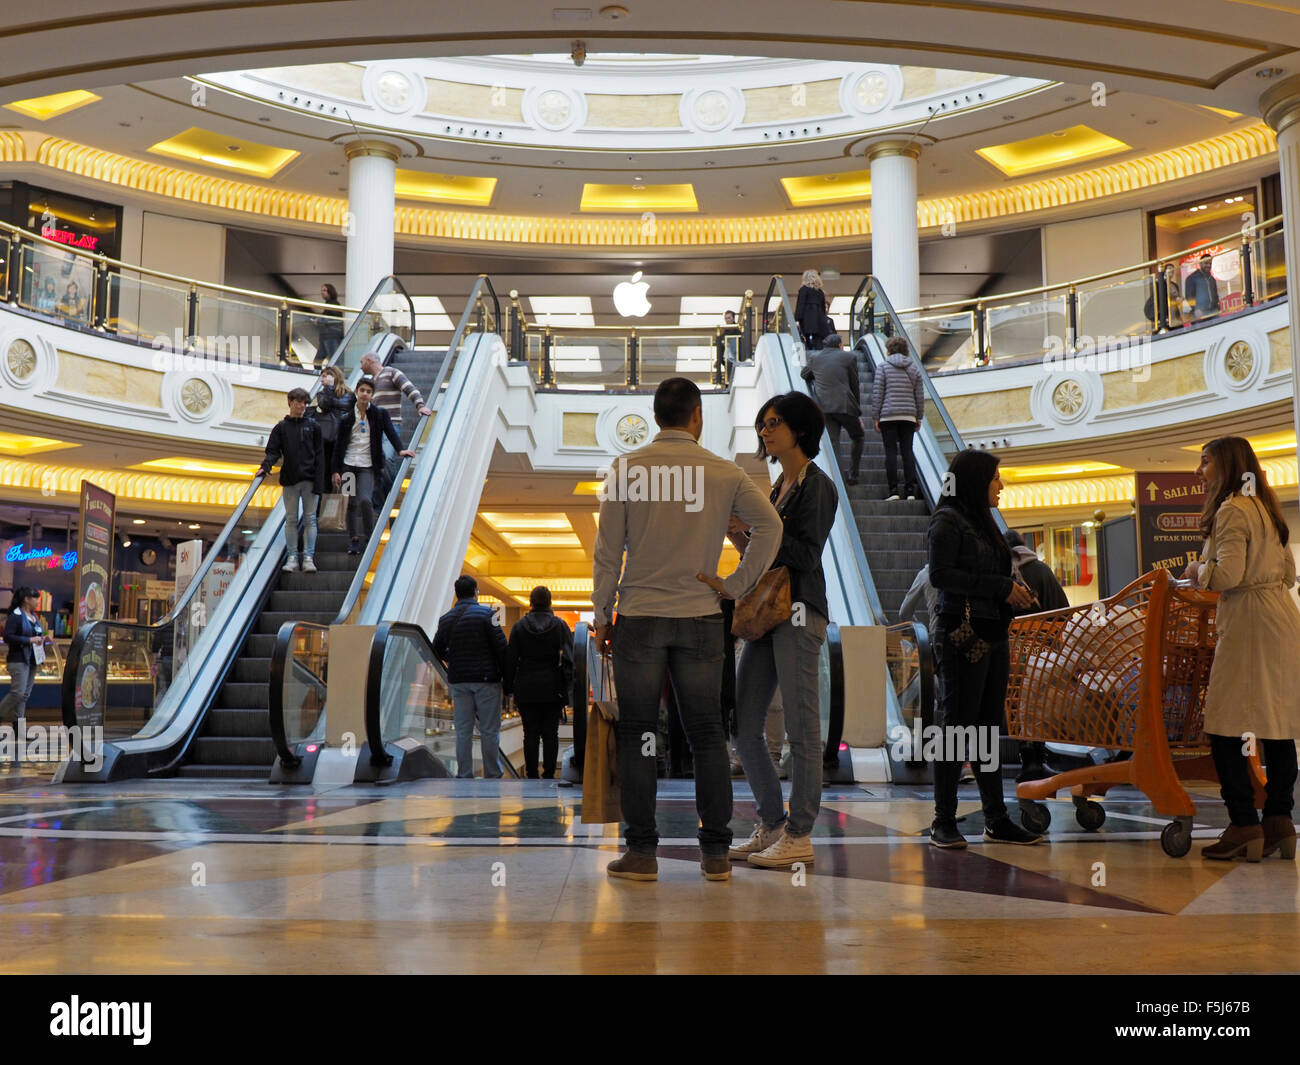 Euroma2 luxury shopping mall interior in the EUR district of Rome, Italy Stock Photo